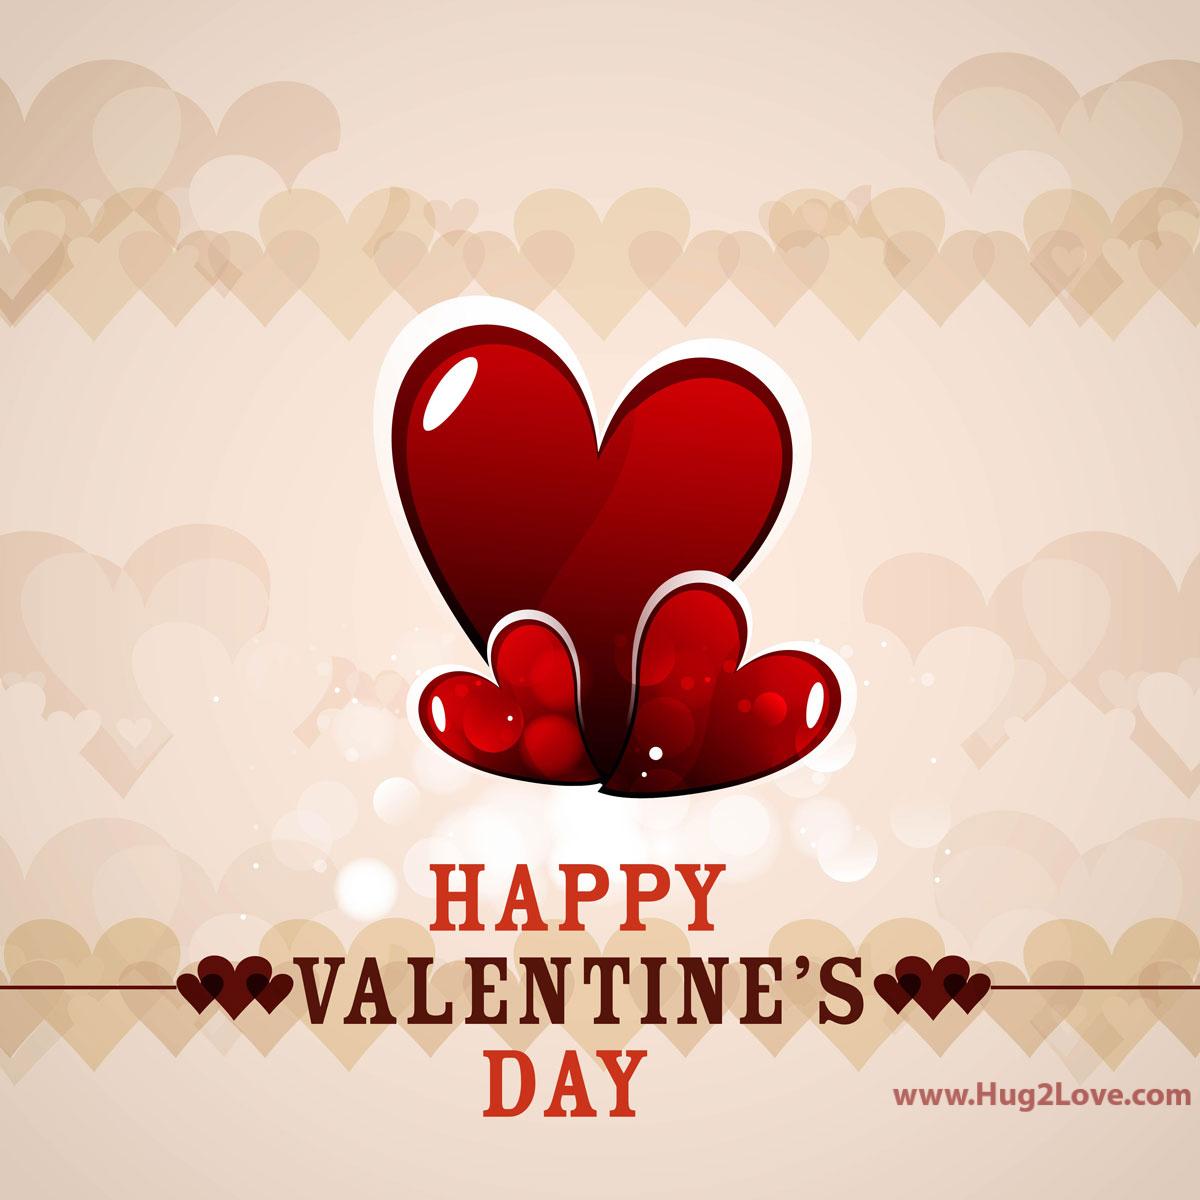 Happy Valentine's Day 2019 Wallpapers - Wallpaper Cave1200 x 1200